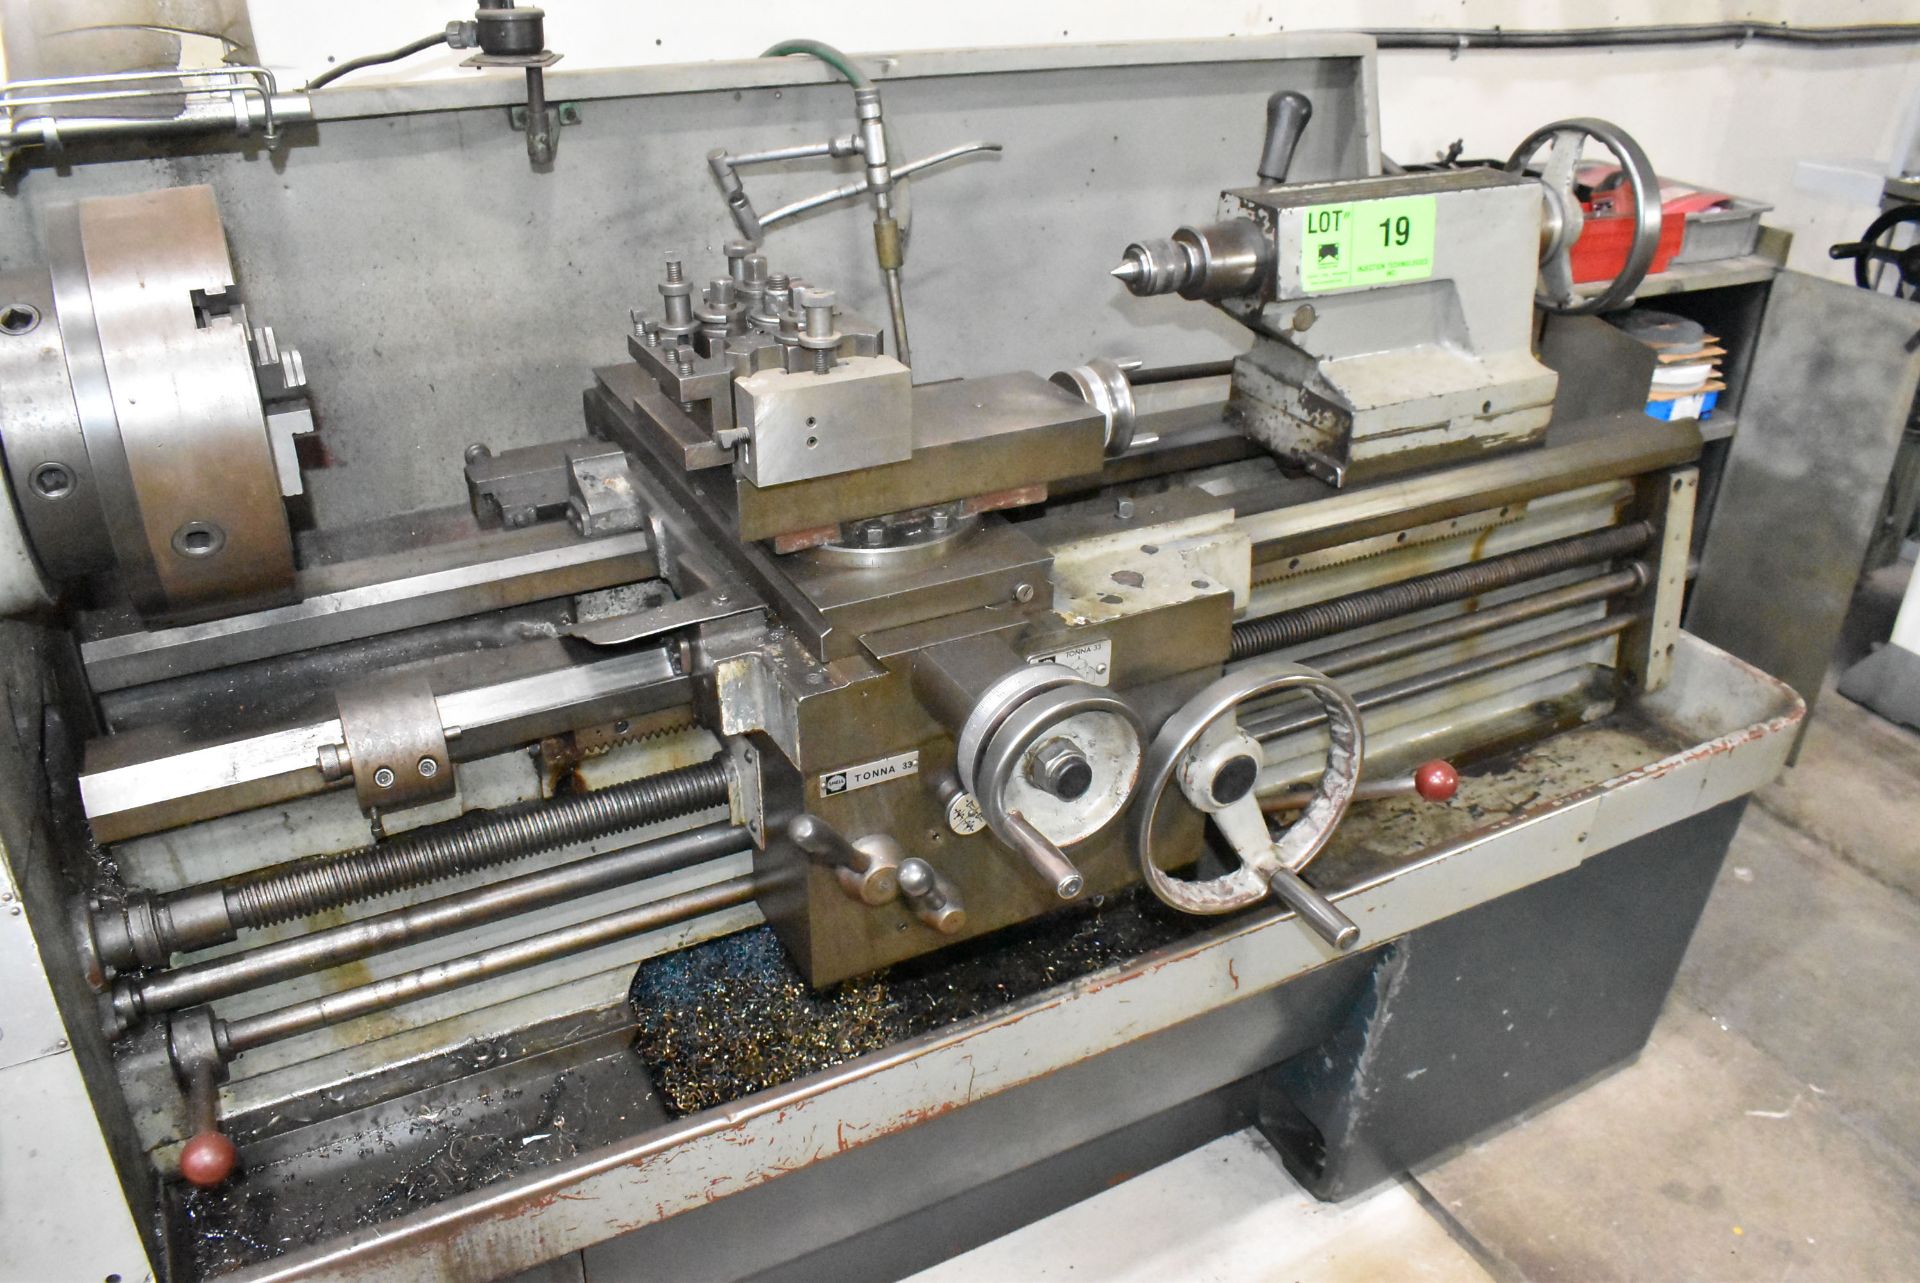 COLCHESTER MASCOT 1600 GAP BED ENGINE LATHE WITH 17" SWING, 40" BETWEEN CENTERS, SPEEDS TO 1,600 - Image 5 of 8